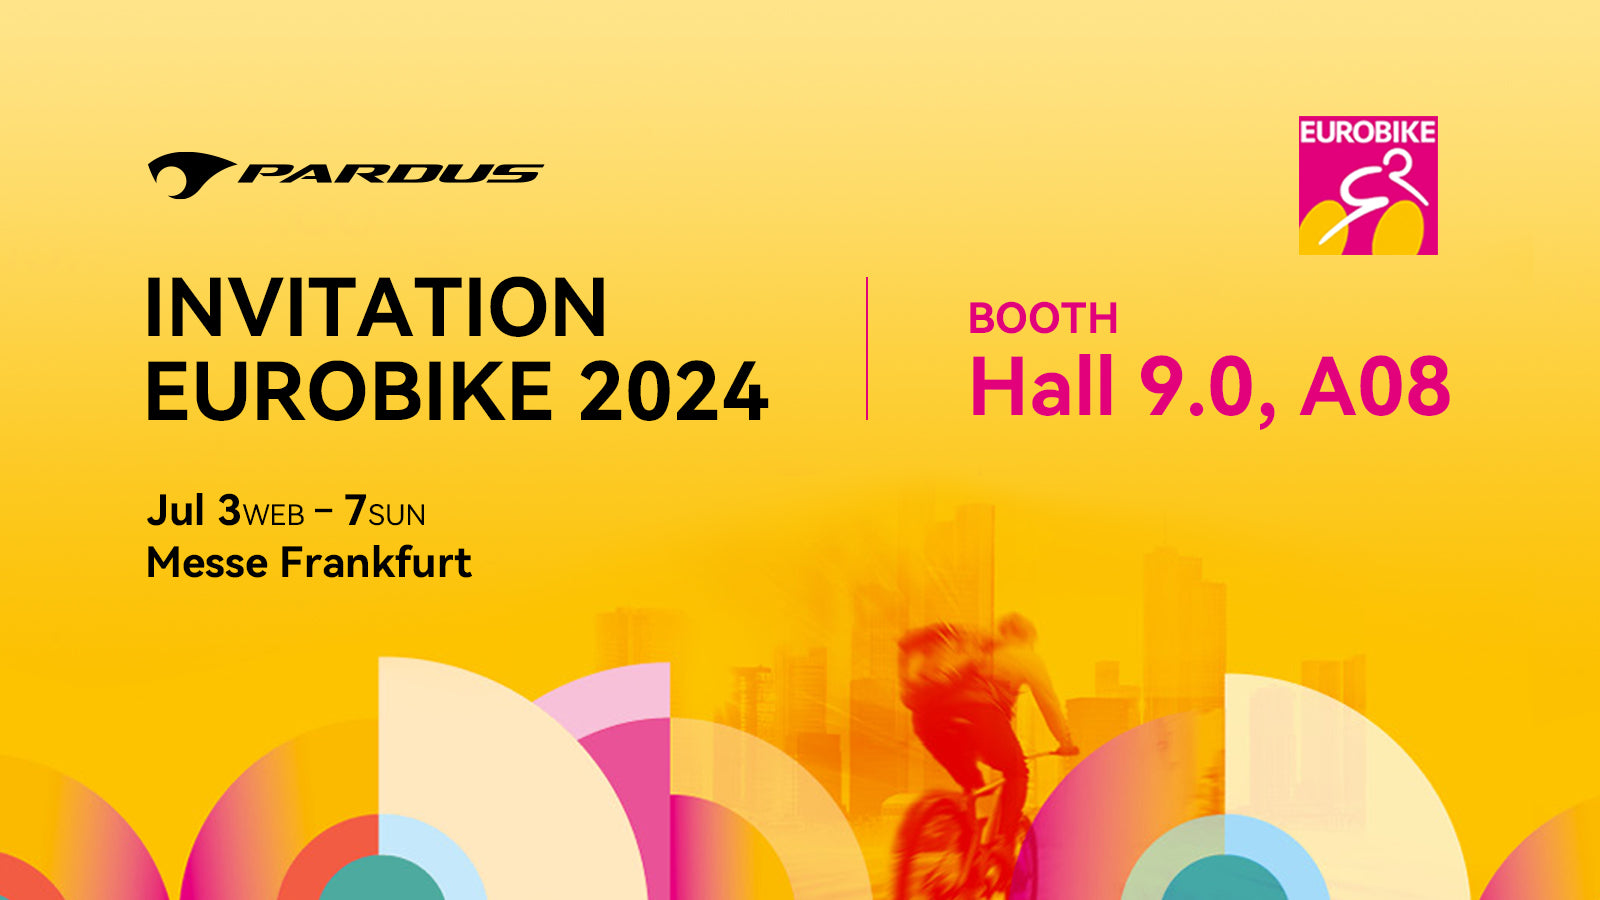 Join PARDUS at the 2024 EUROBIKE Show in Europe